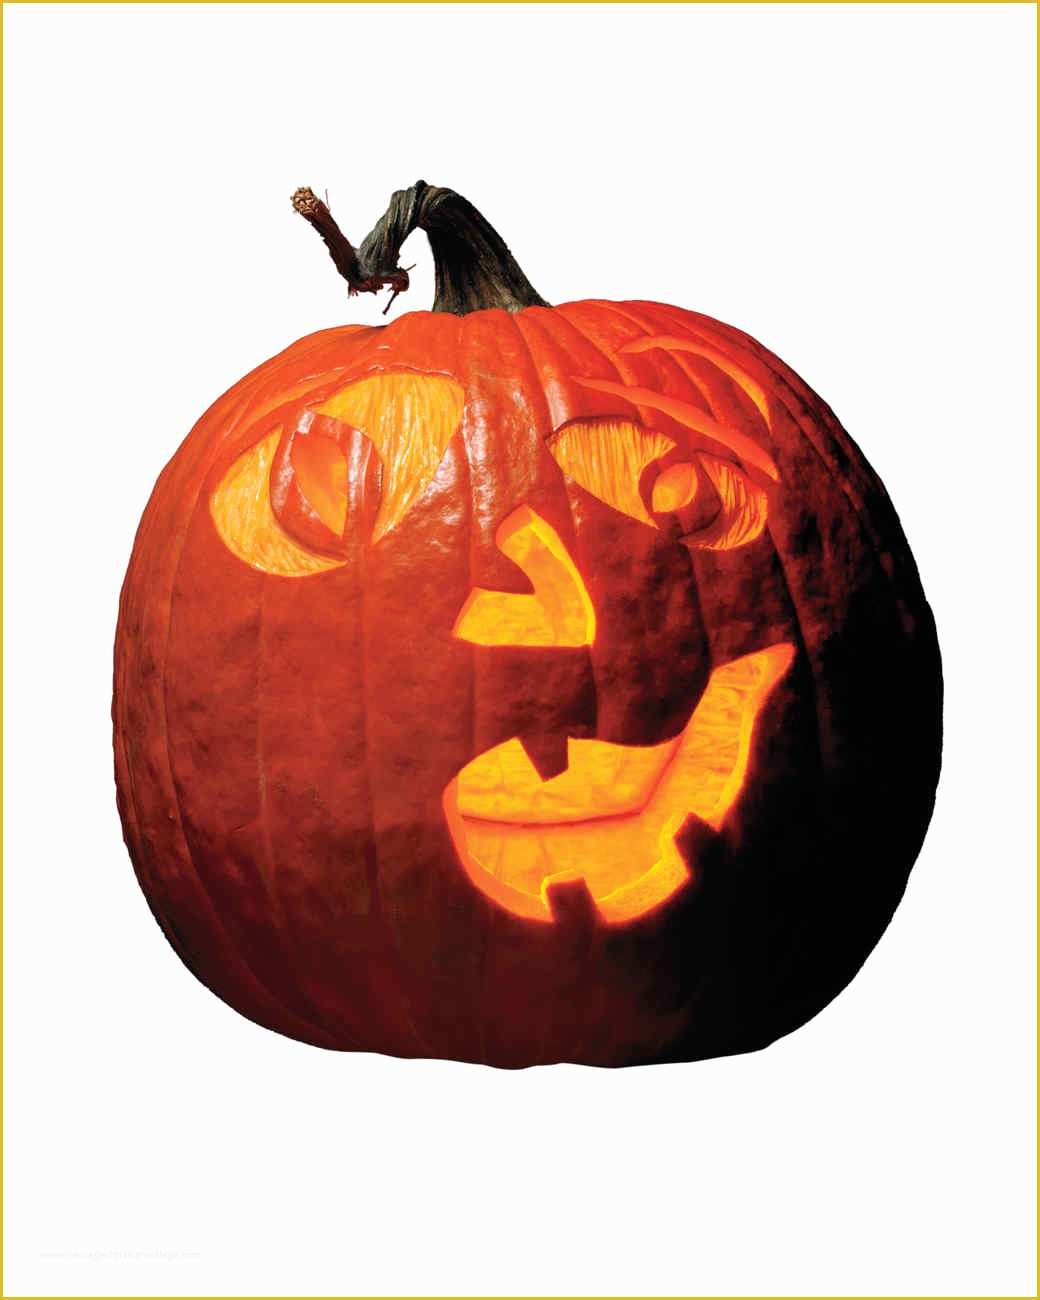 Pumpkin Carving Ideas Templates Free Of Halloween Pumpkin Carving Patterns and Pumpkin Templates